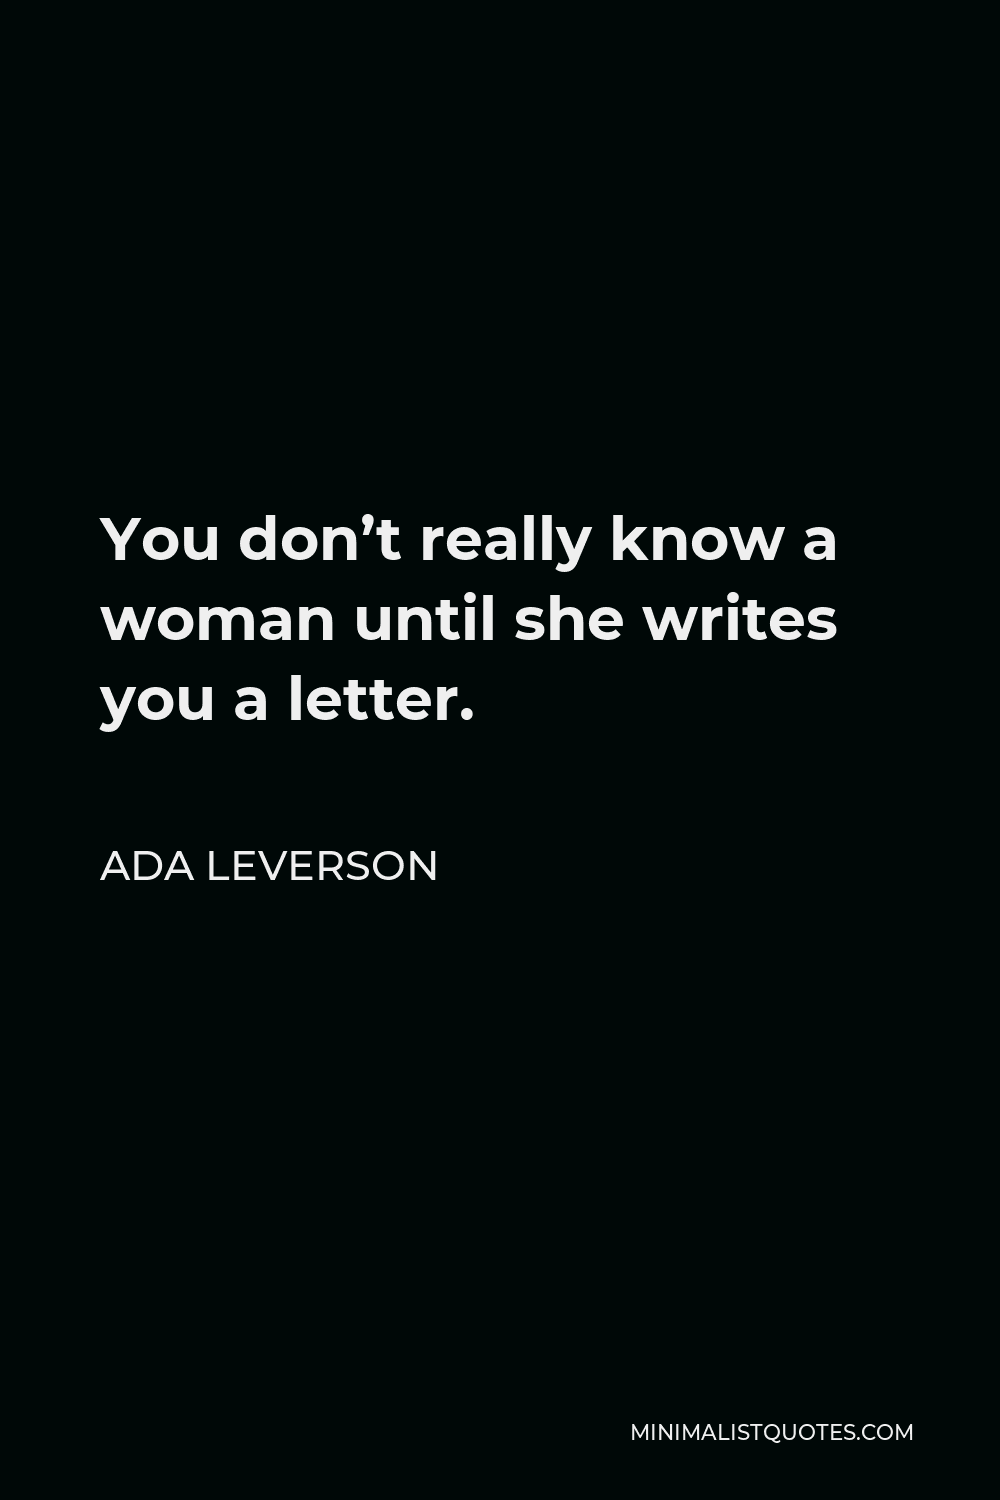 Ada Leverson Quote - You don’t really know a woman until she writes you a letter.